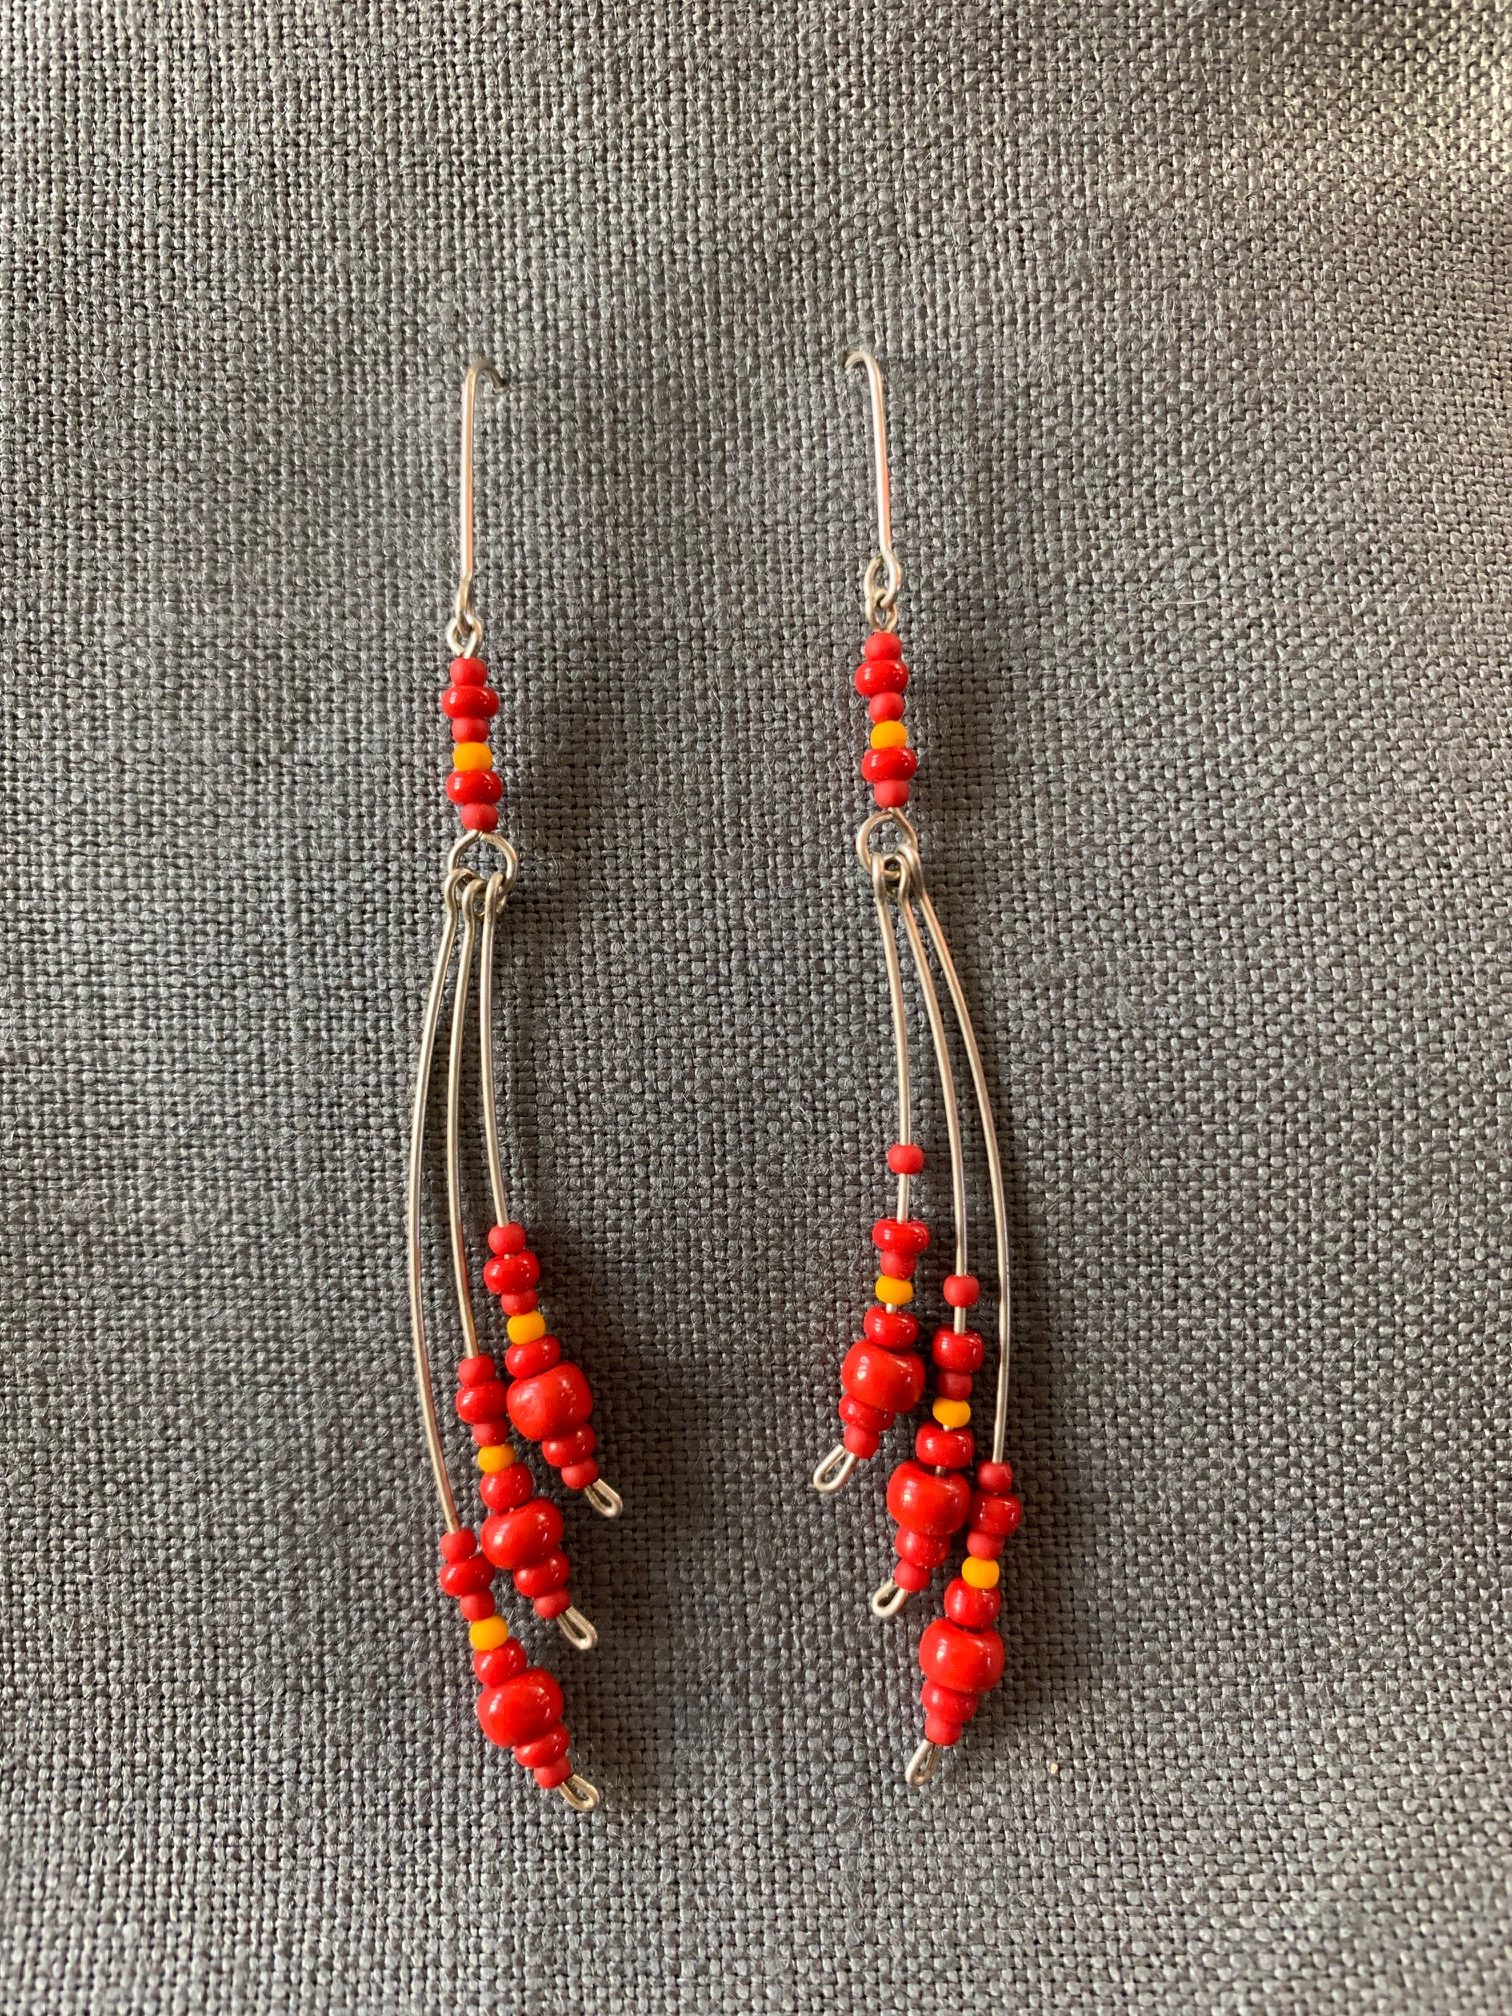 Vibrant Beads and Sterling Silver – Dangle Earrings – For The Fun of Art